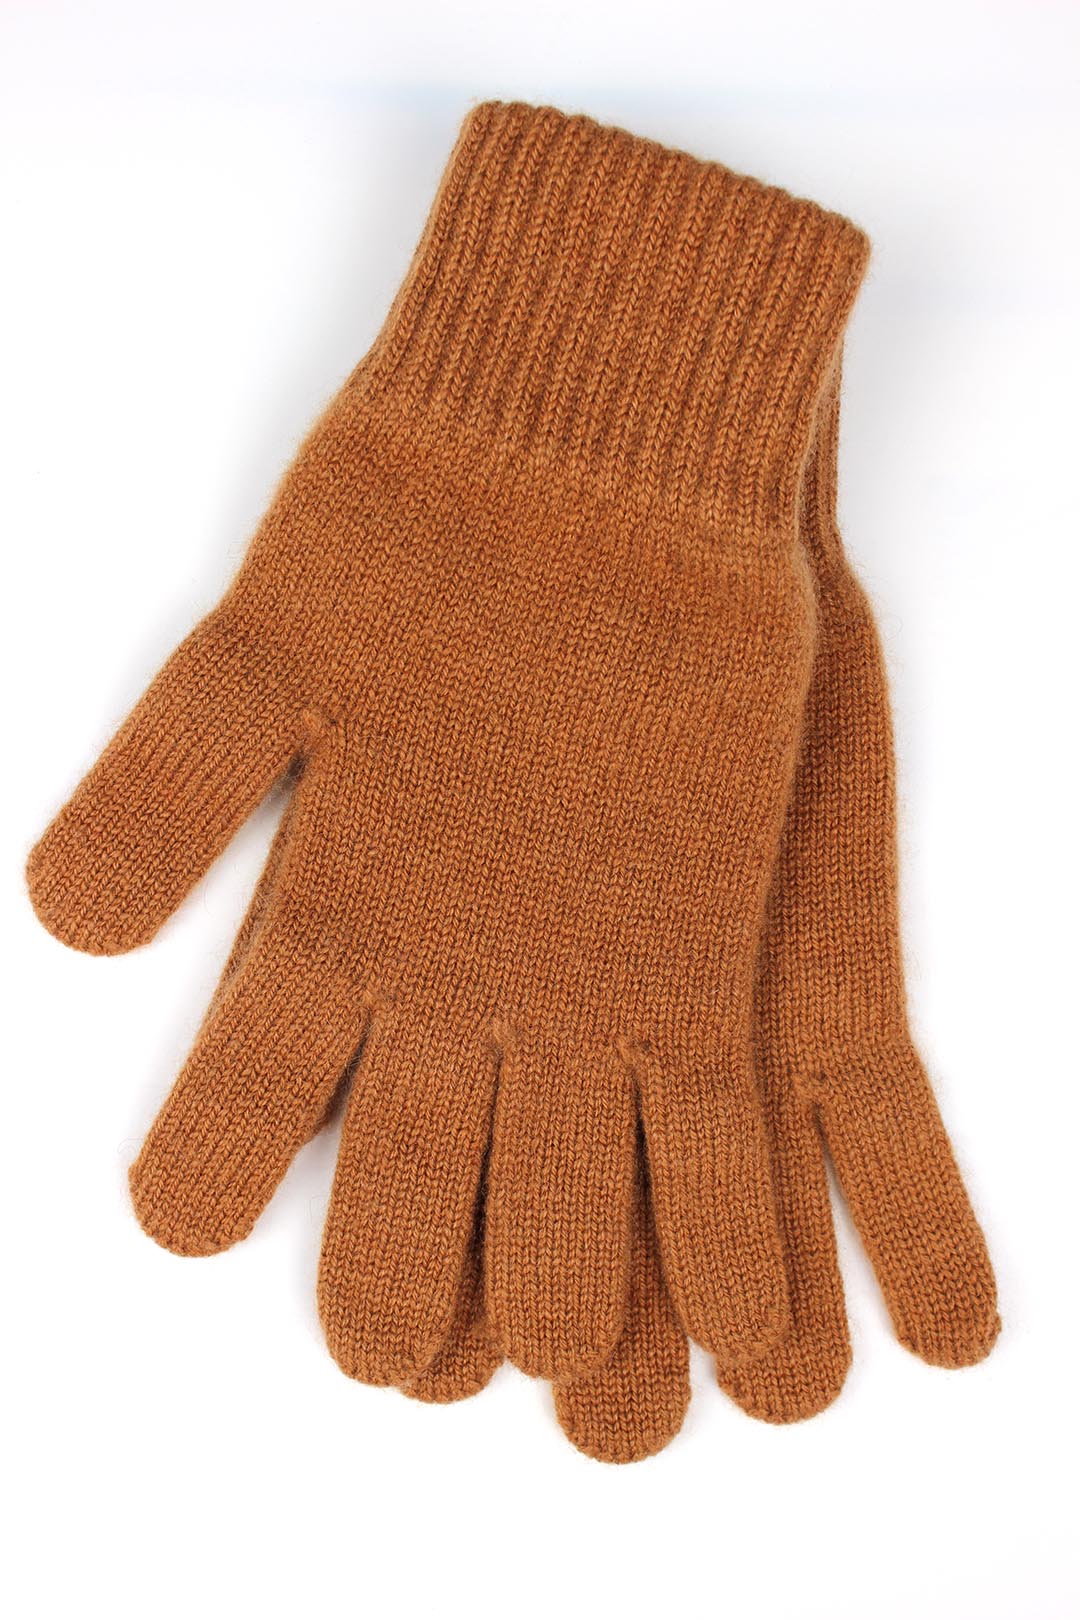 Cashmere gloves in orange shades cinnamon, ginger and pumpkin. Knitted in the Scottish borders